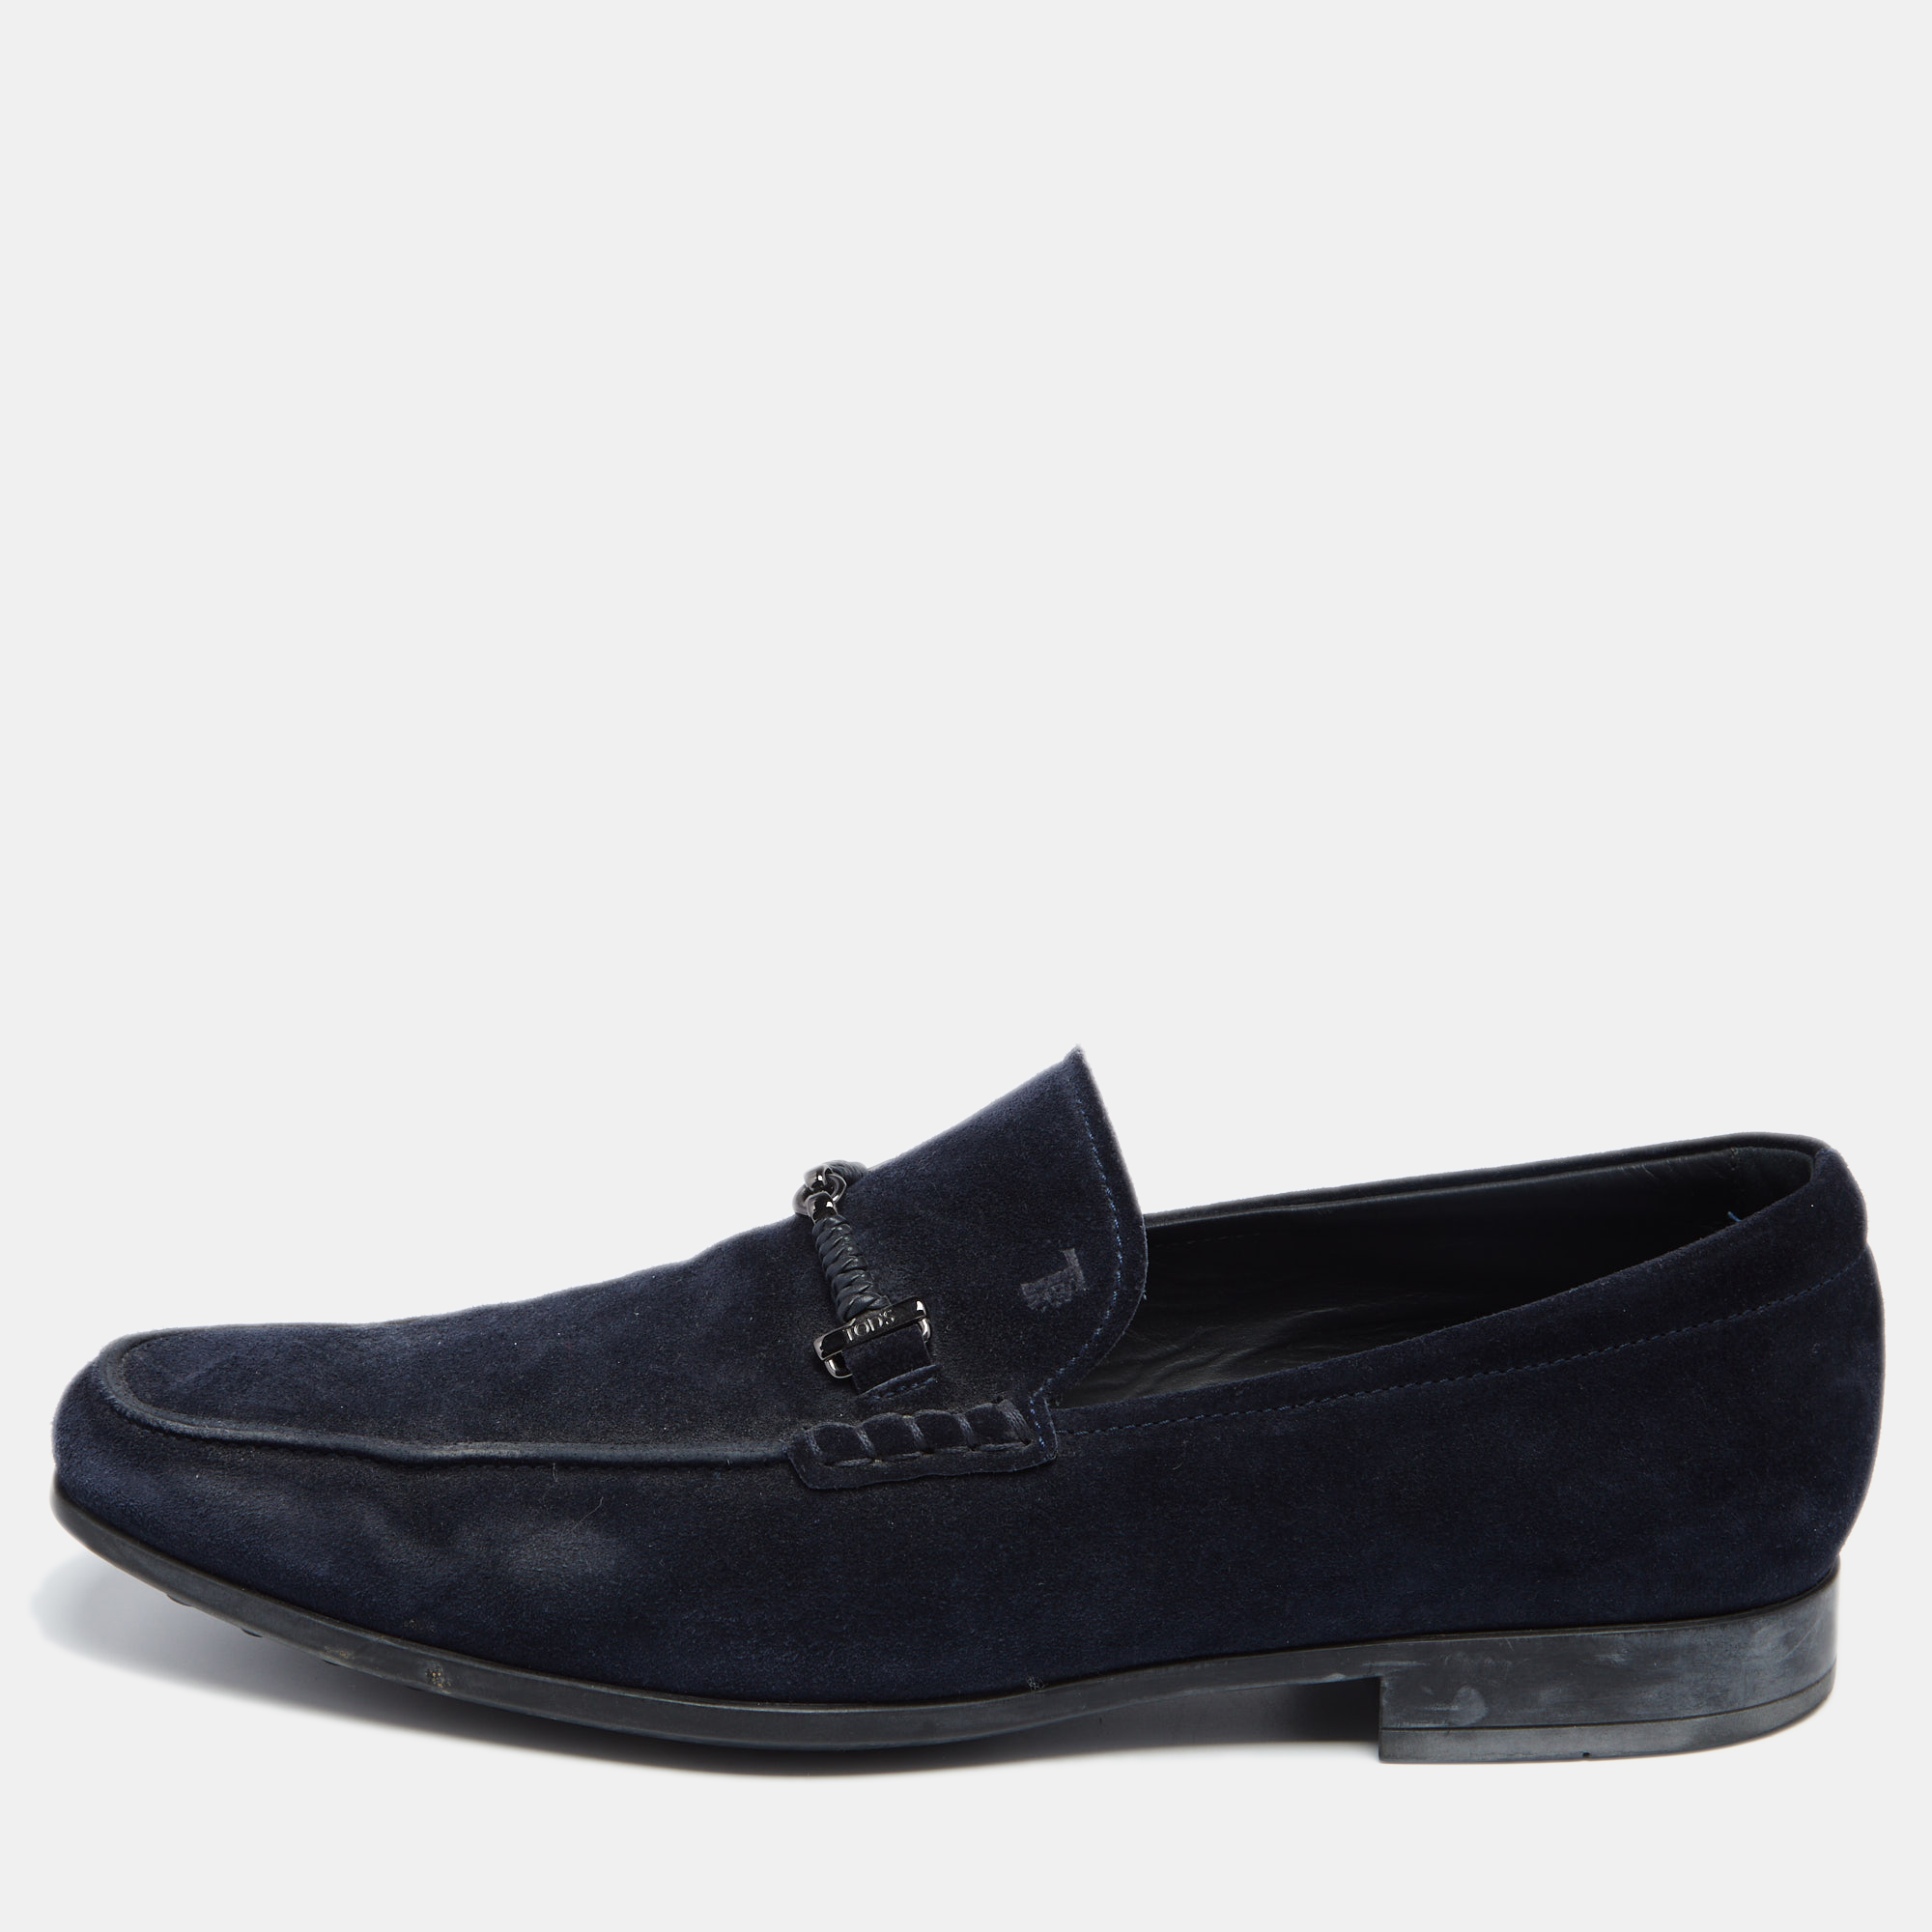 Tod's Navy Blue Suede Slip On Loafers Size 42